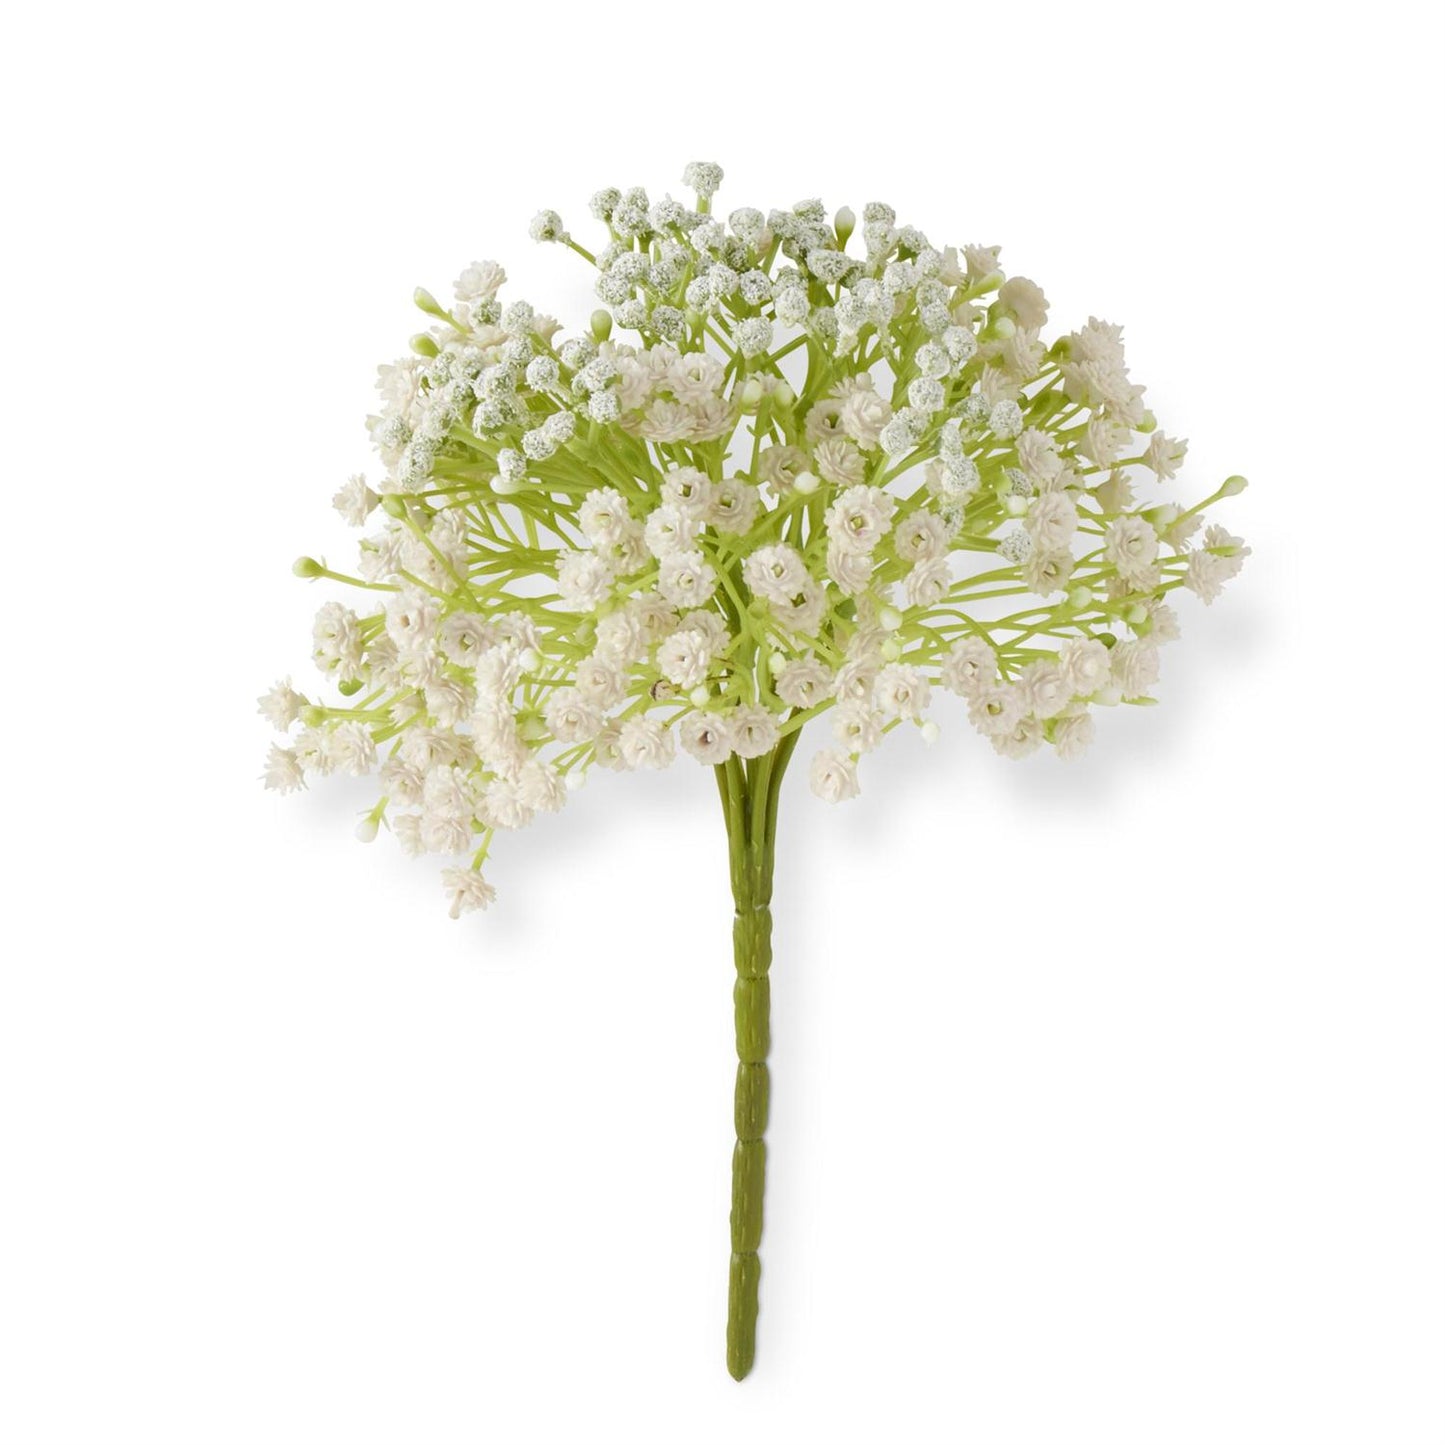 Find the White Baby's Breath Bundle By Ashland® at Michaels